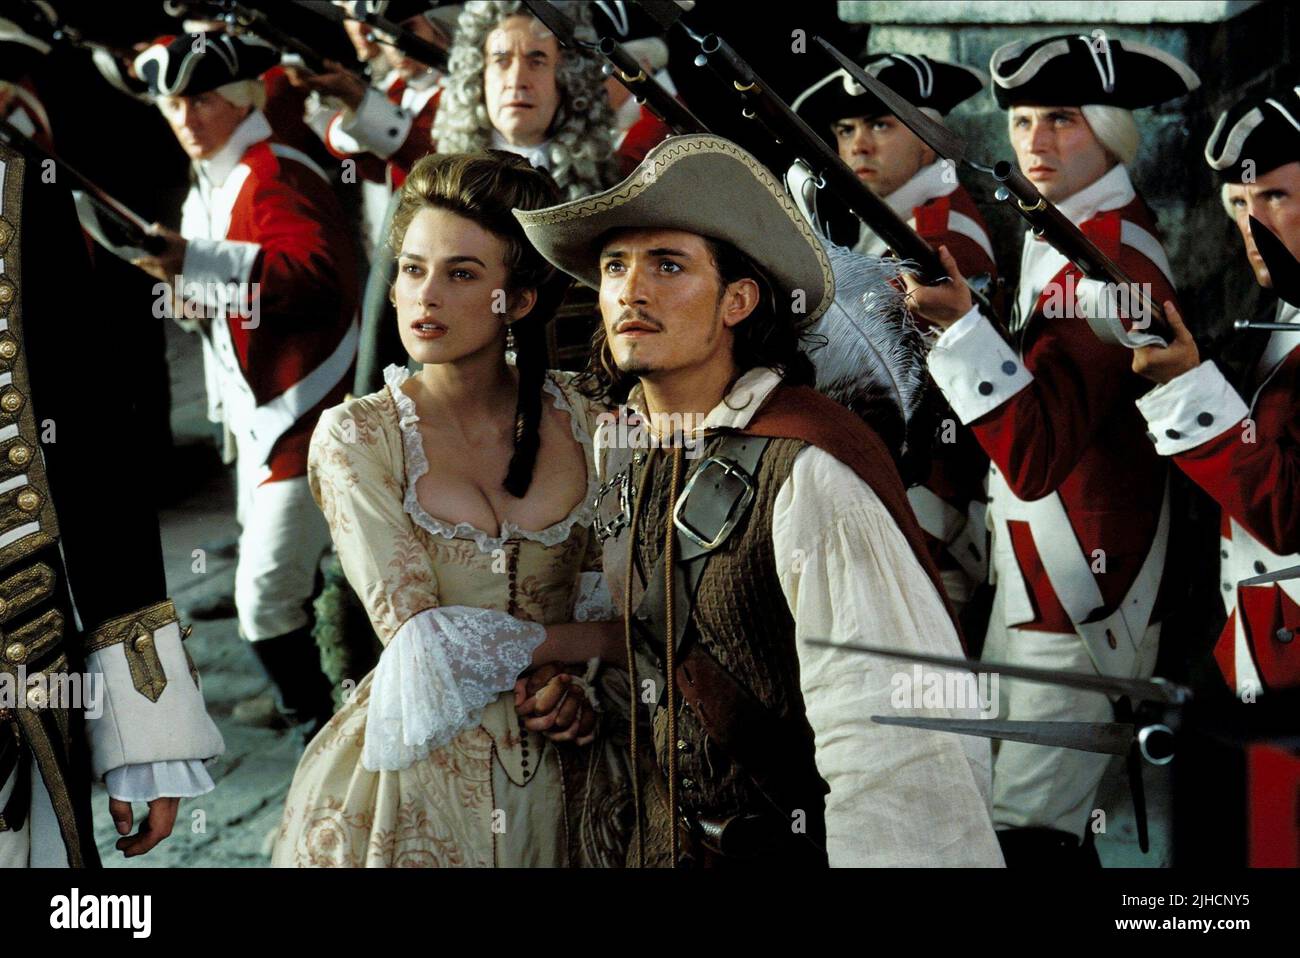 KEIRA KNIGHTLEY, ORLANDO BLOOM, PIRATES OF THE CARIBBEAN: THE CURSE OF THE BLACK PEARL, 2003 Stock Photo